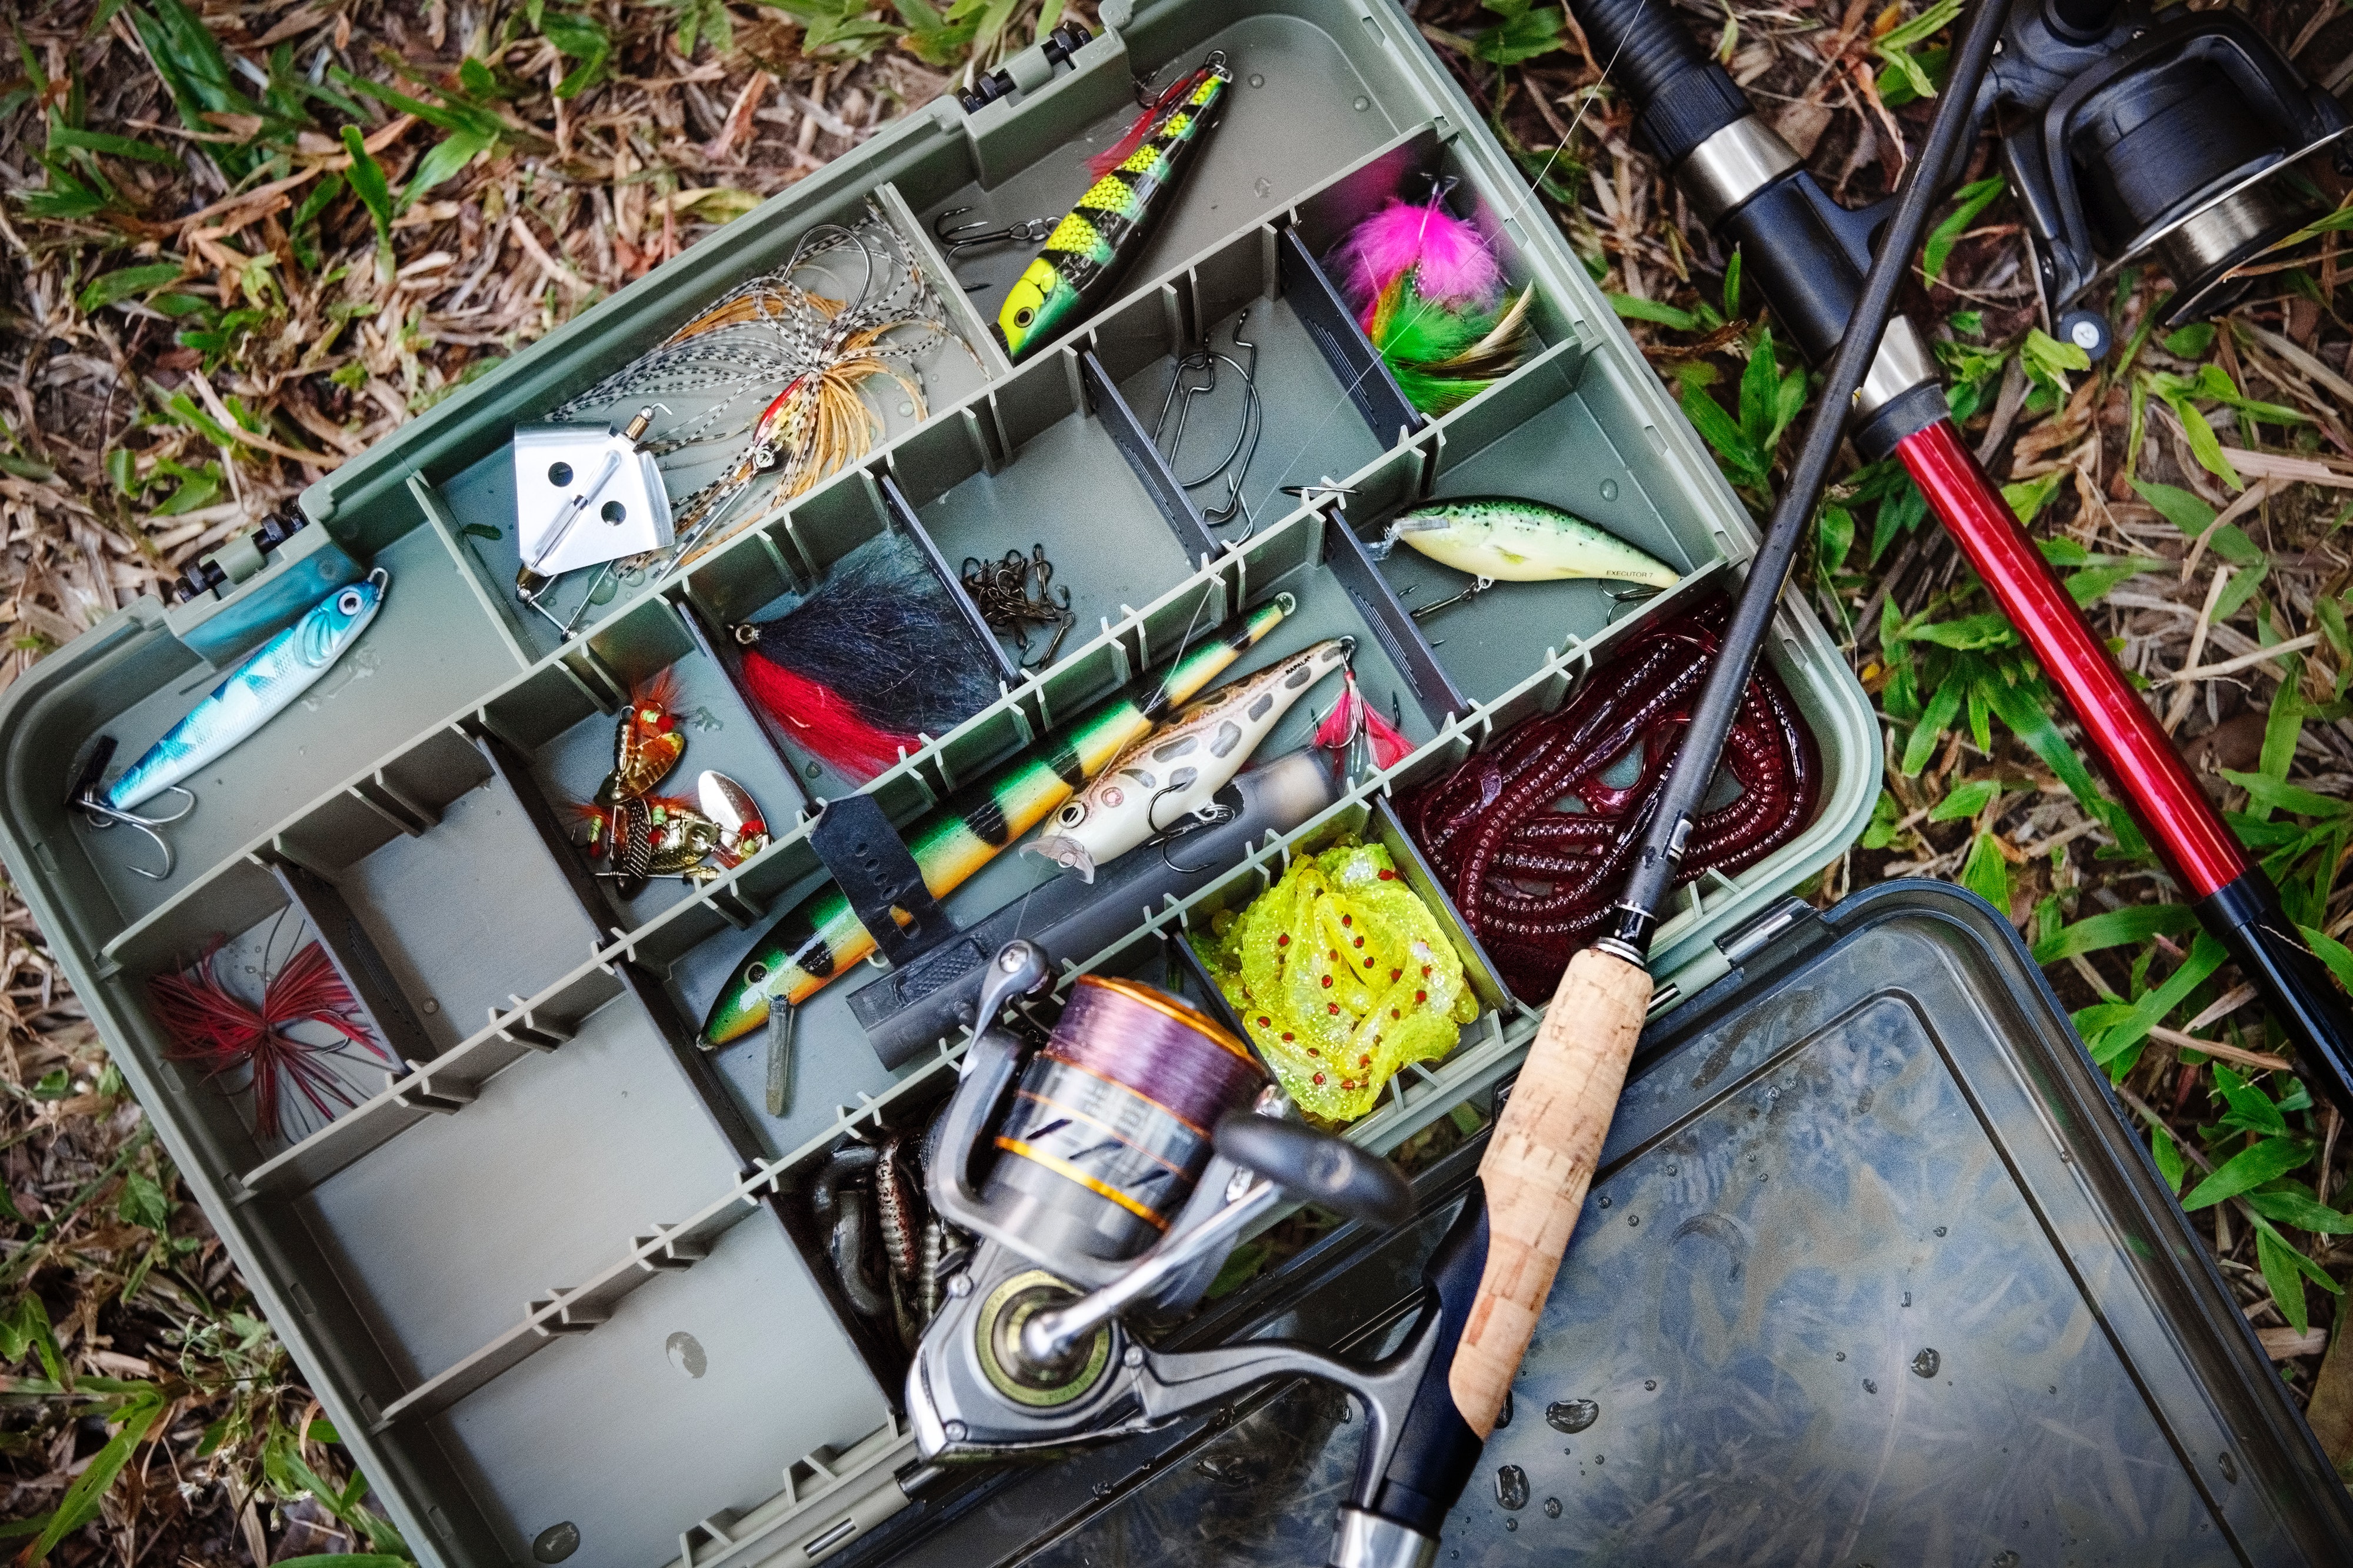 Drink like a fish: Helpful hacks for fishing and drinking - Beer